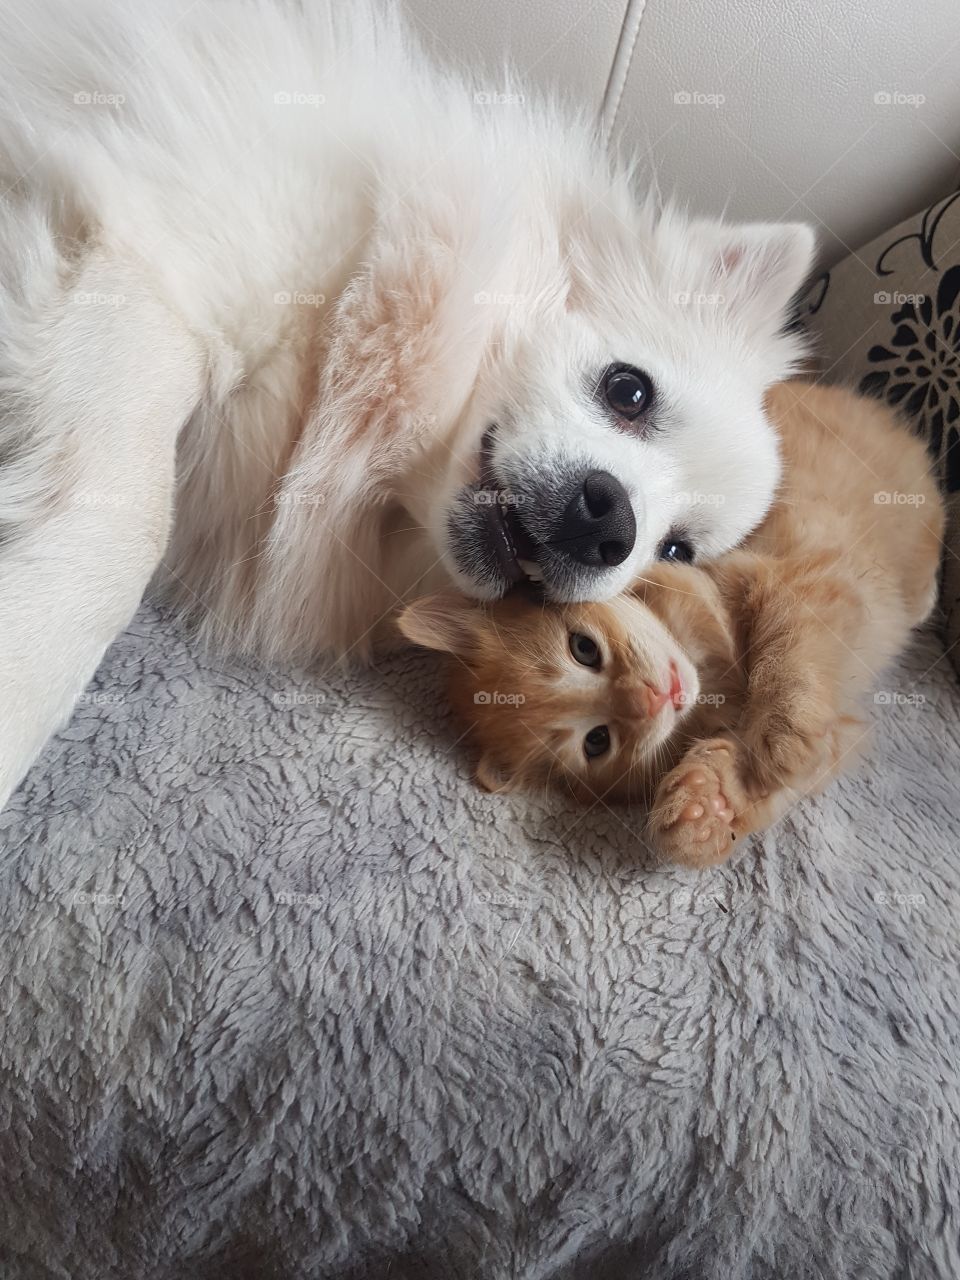 kitten born at home. our dog fell in love with him right away and a friendship was born .